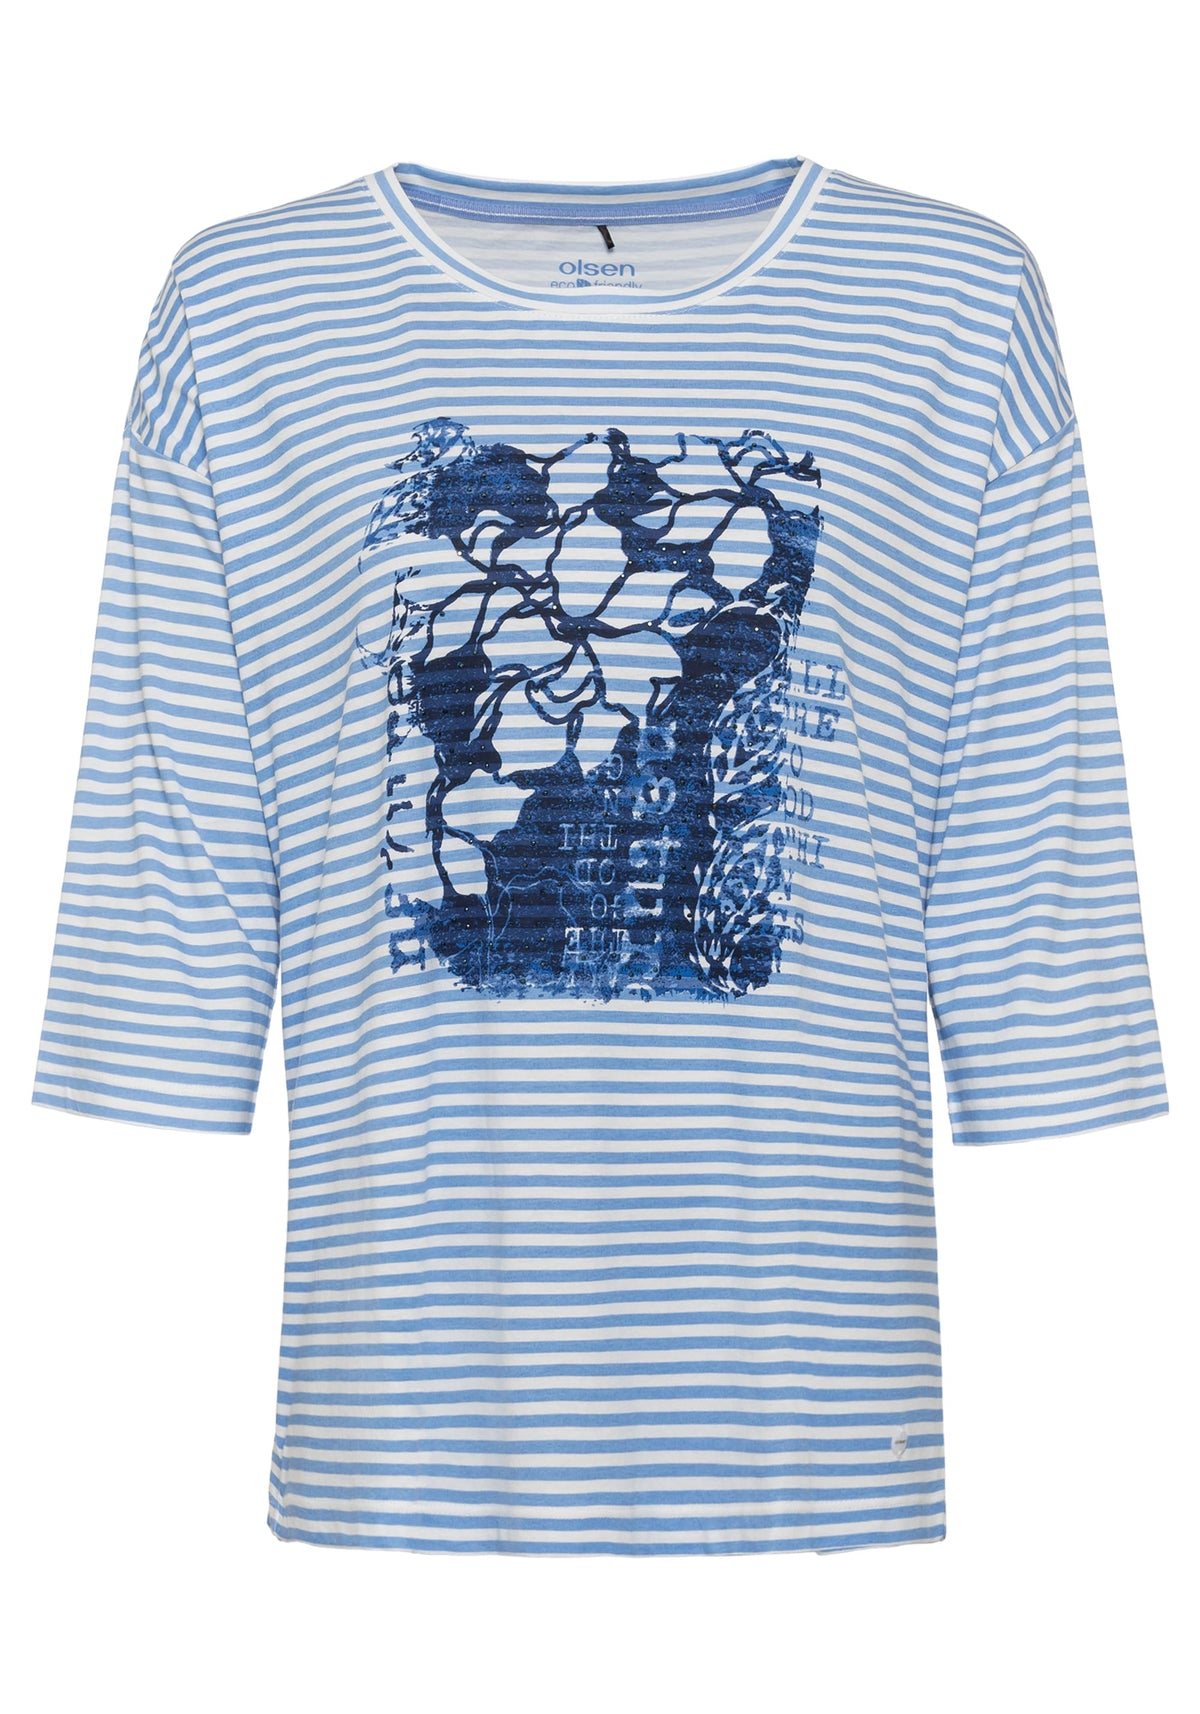 3/4 Sleeve Stripe and Placement Print T-Shirt containing TENCEL™ Modal